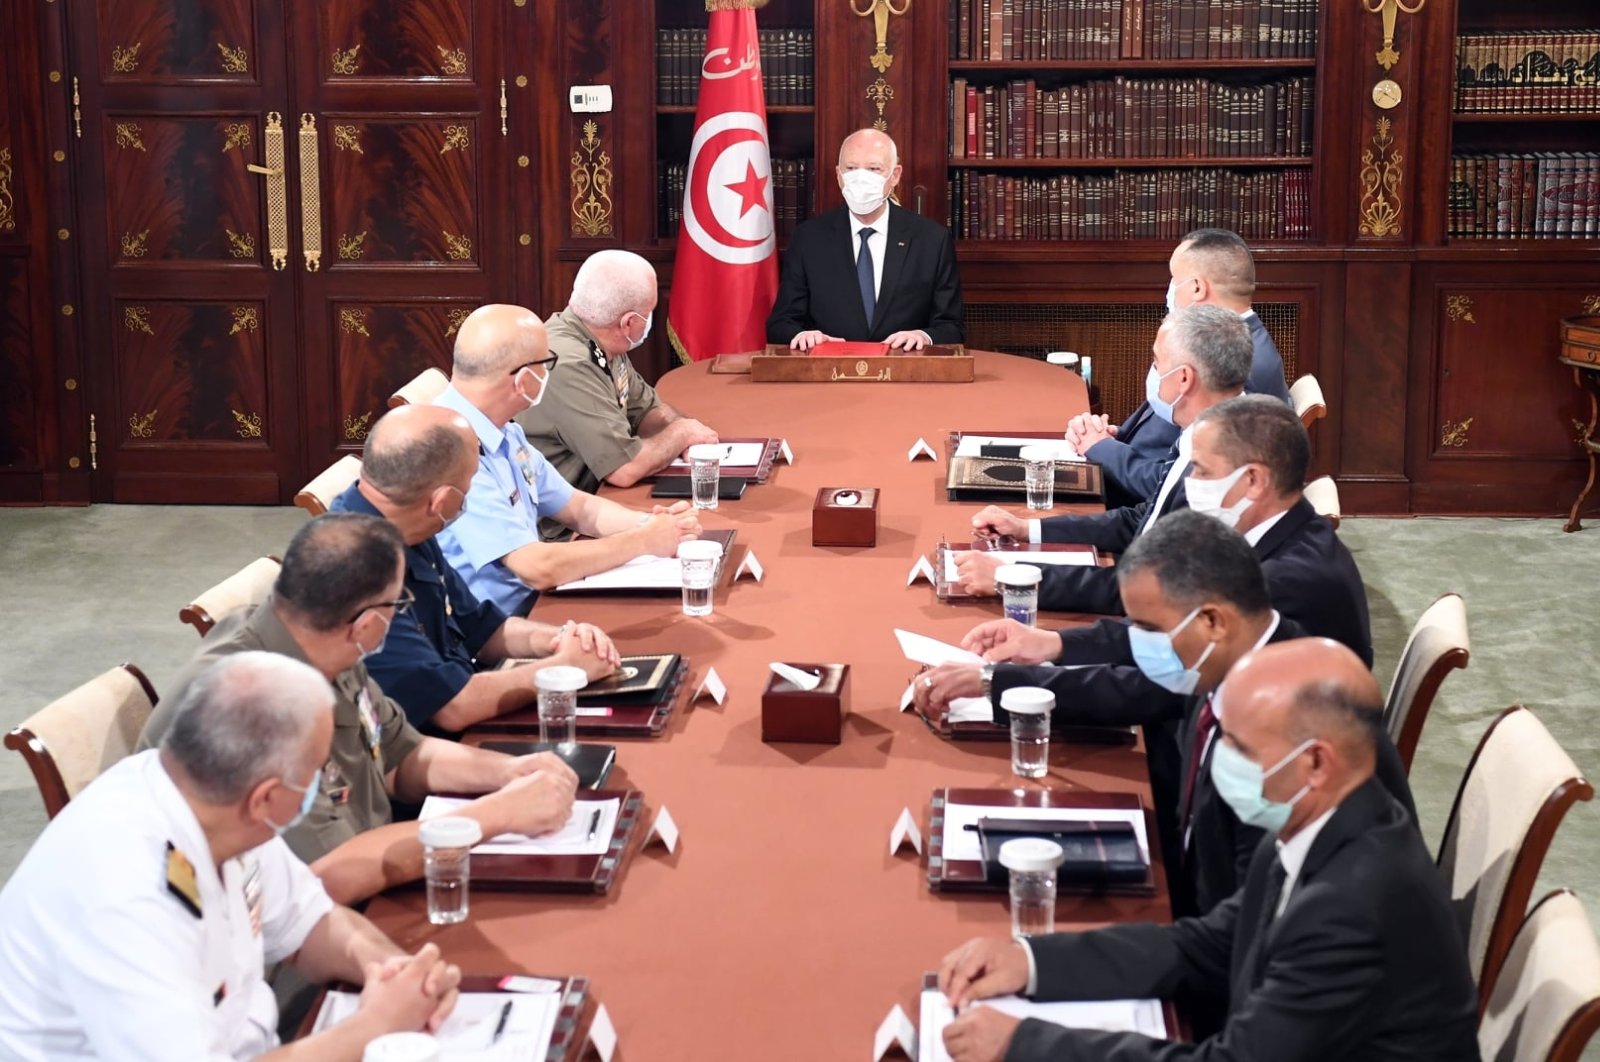 After the coup, Tunisian President Saied loses more